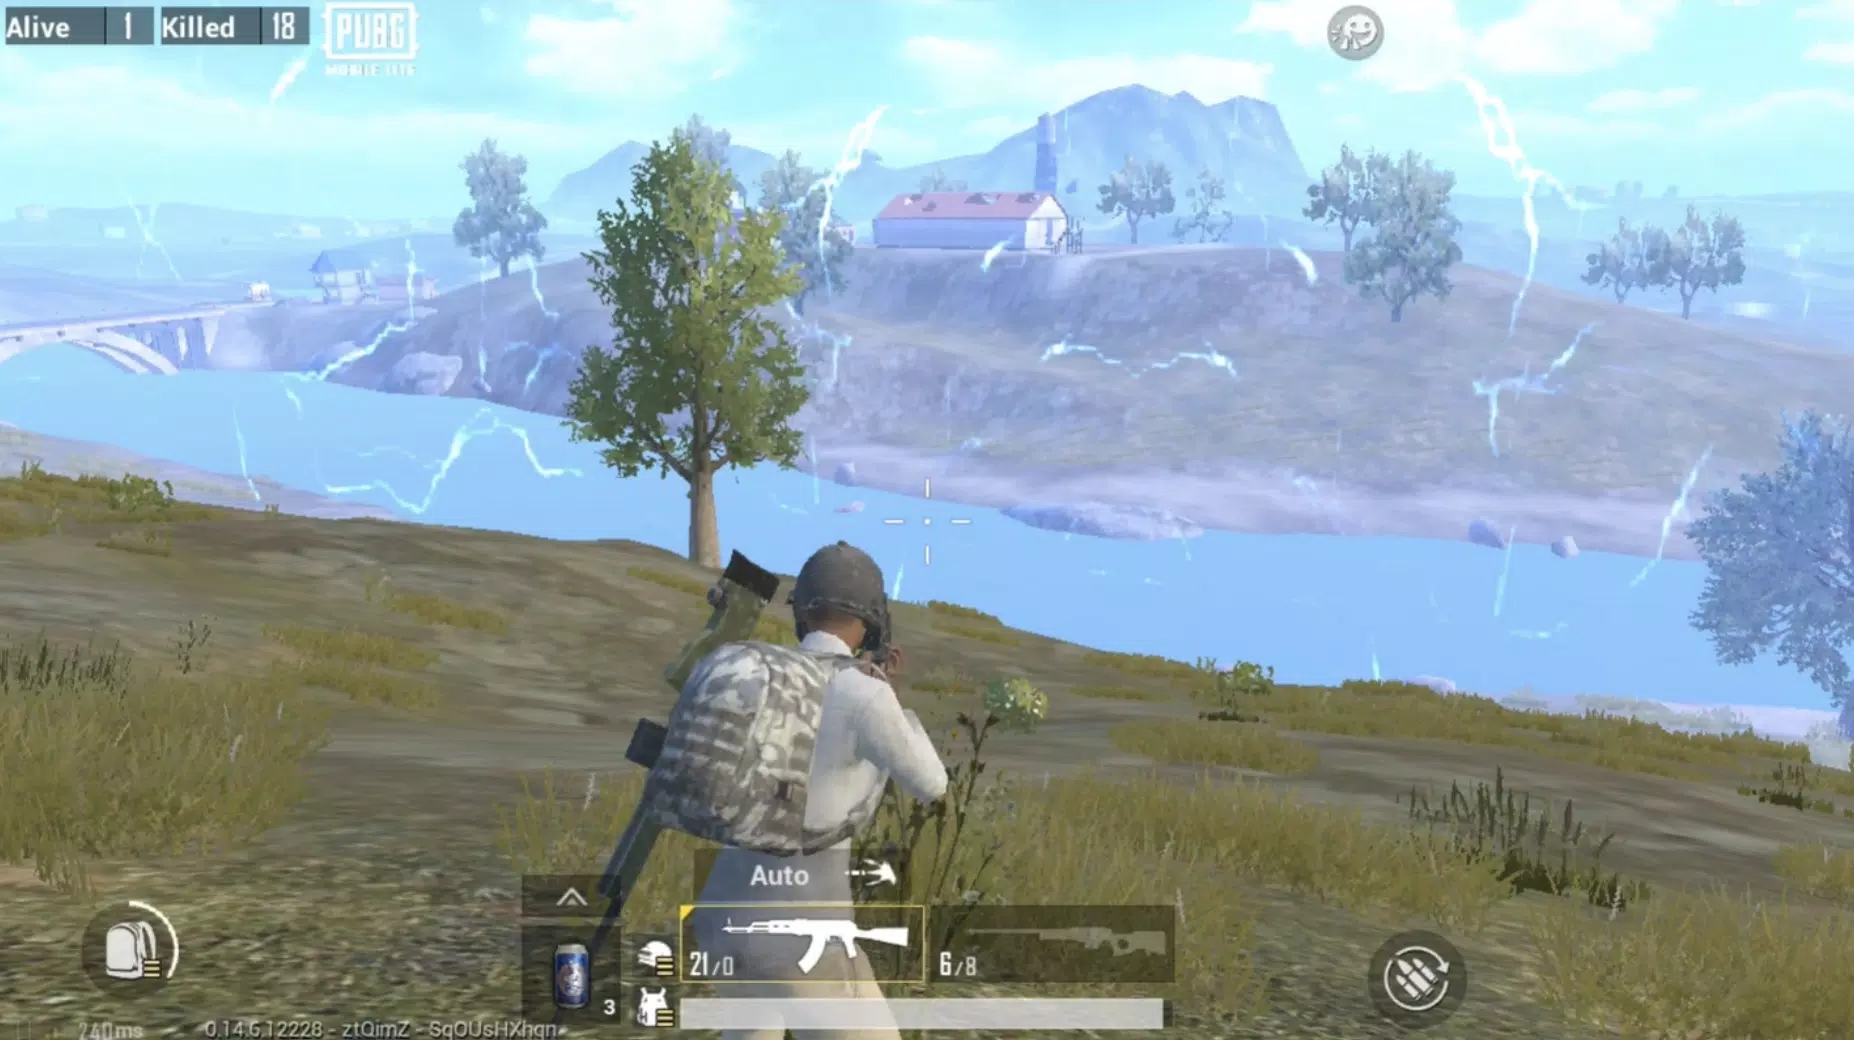 PUBG MOBILE LITE APK (Android Game) - Free Download